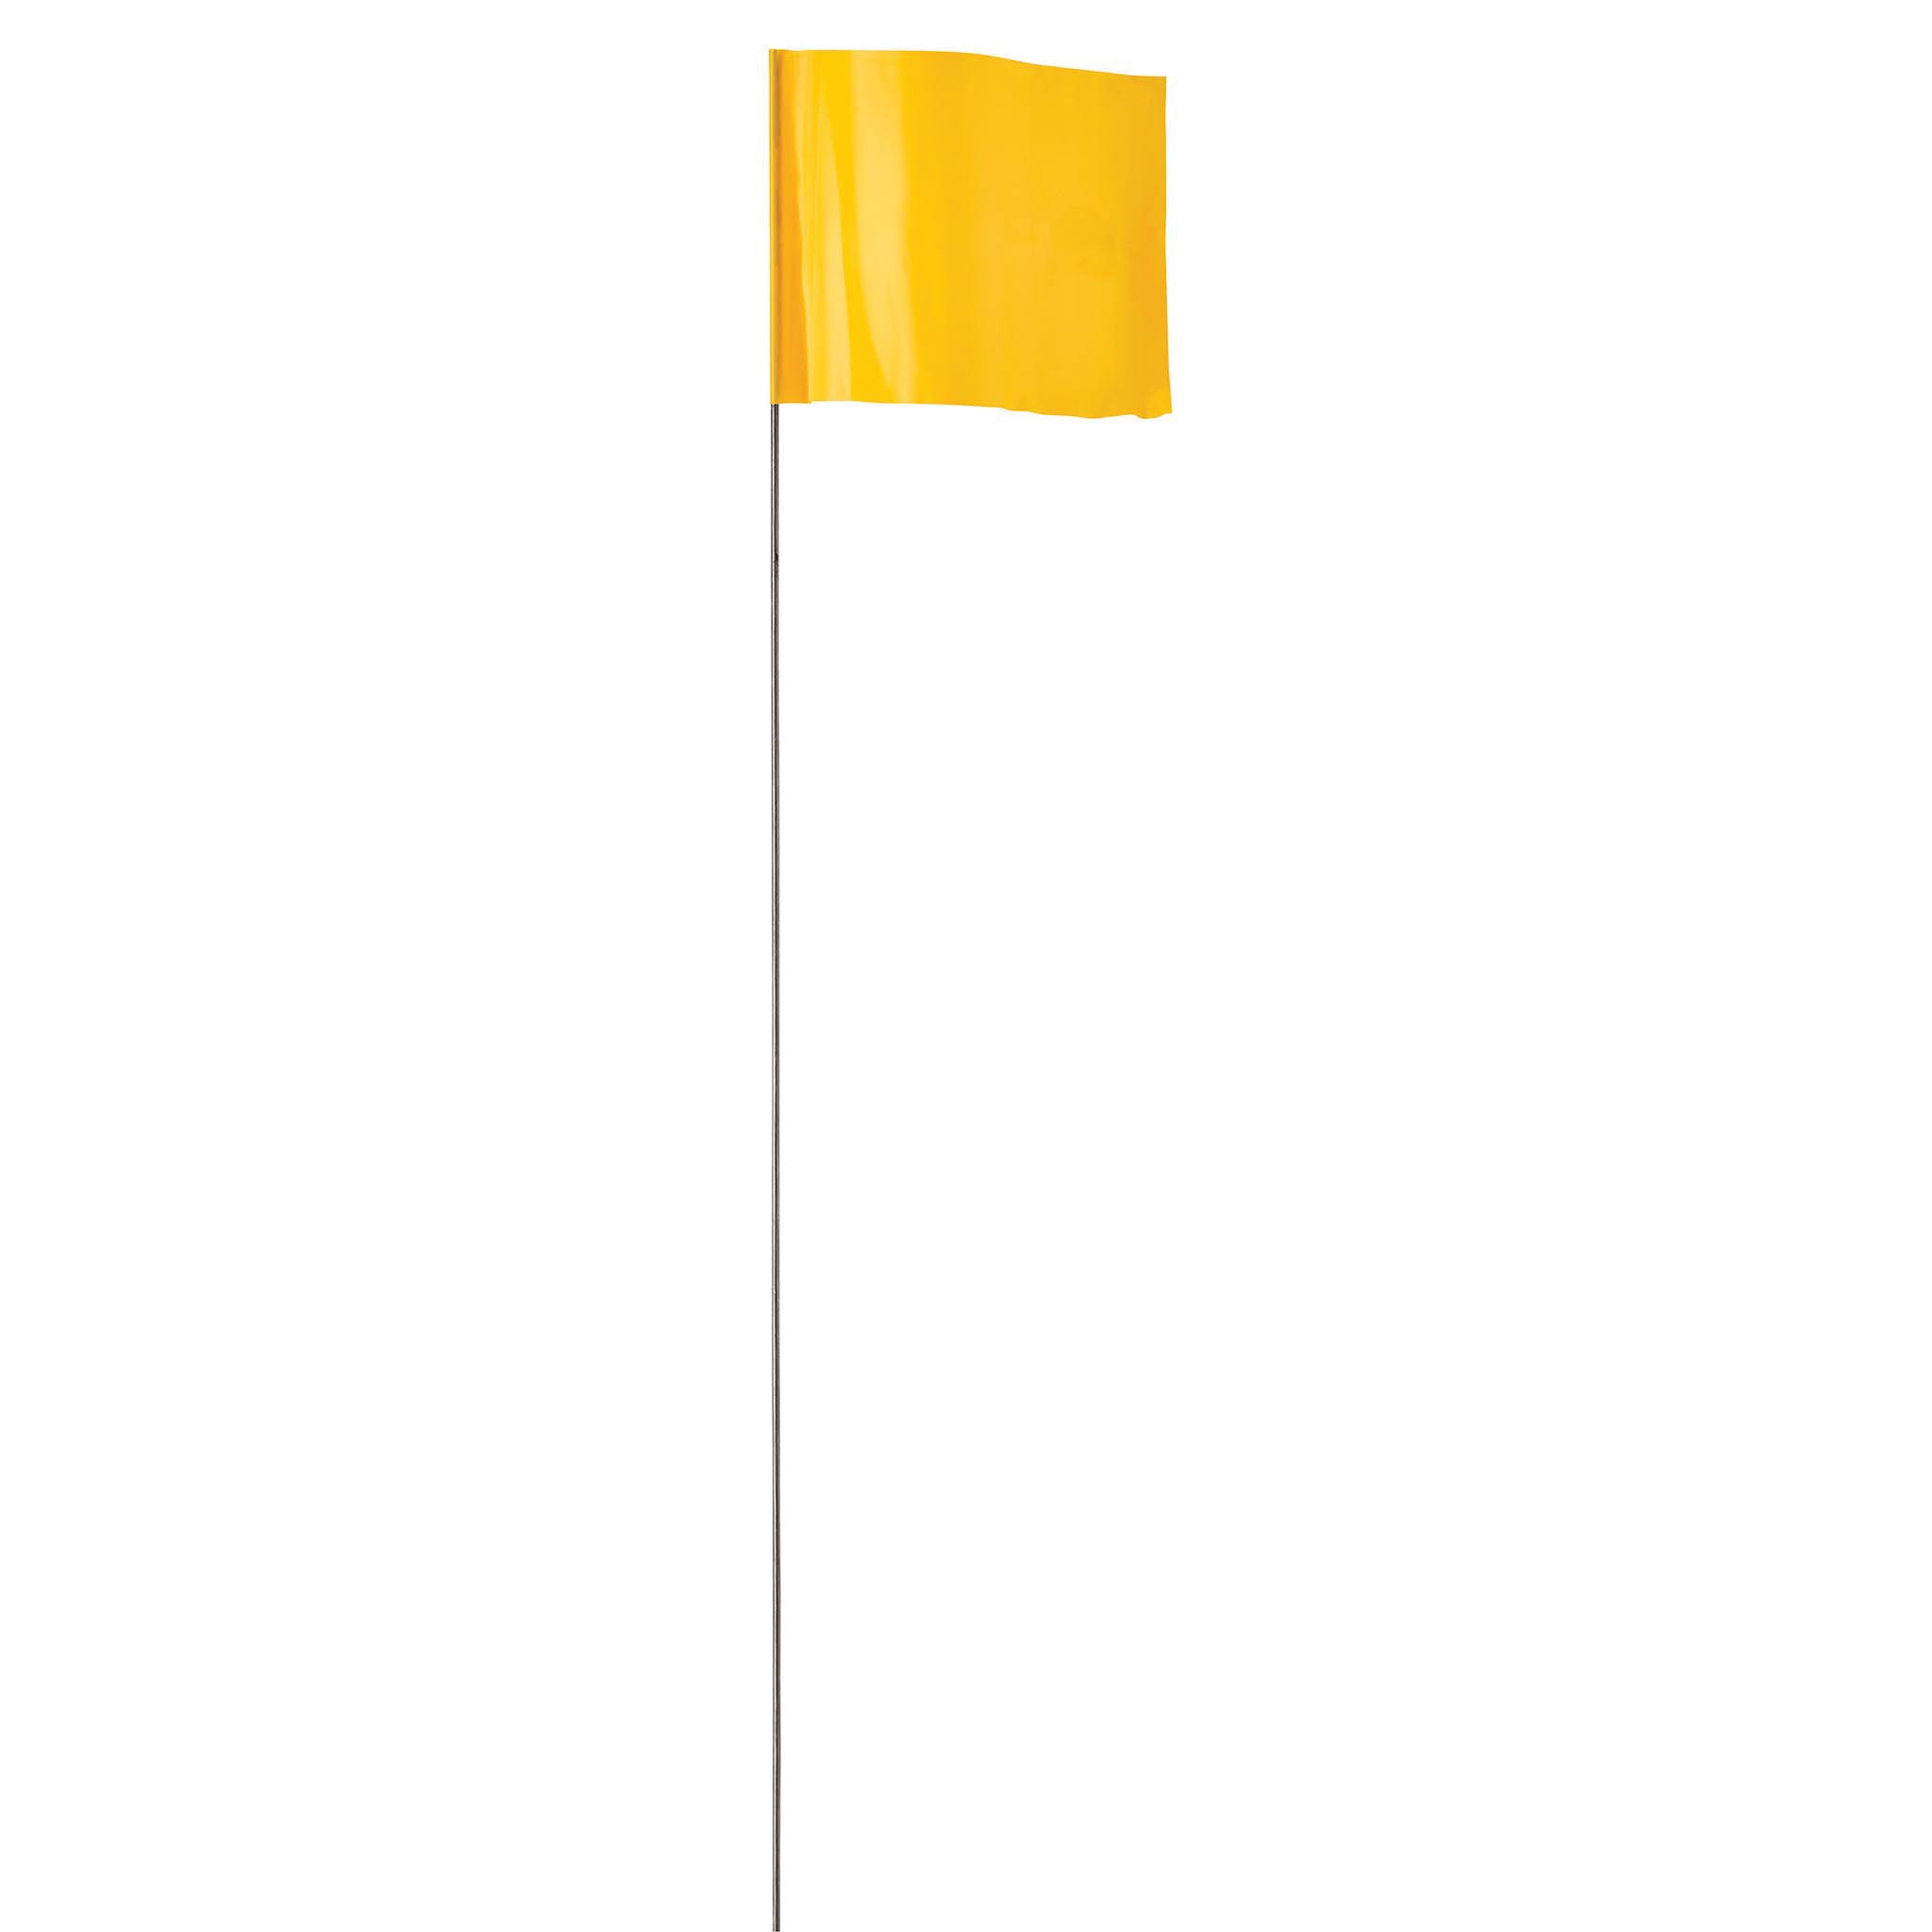 78004 Stake Flag, Yellow, 2-1/2 in W Flag, 3-1/2 in H Flag